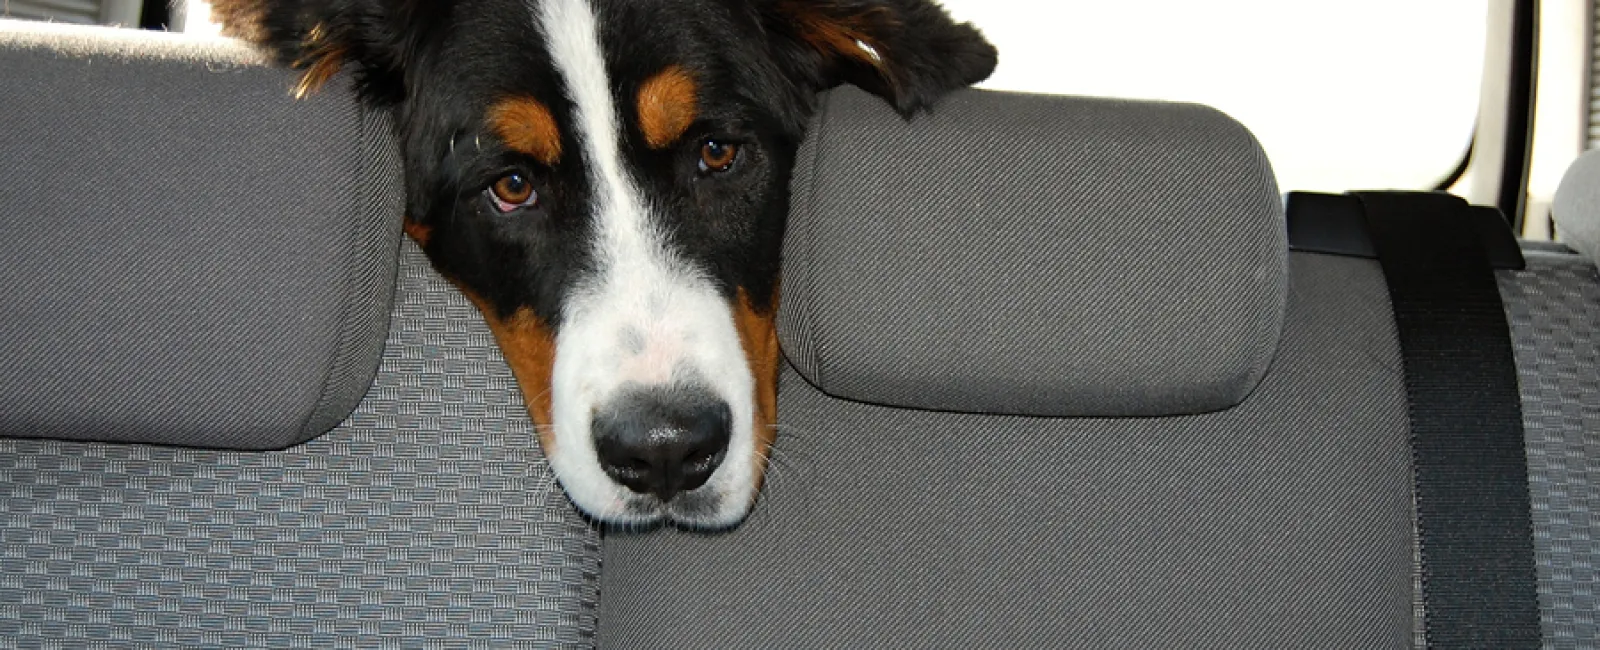 Protecting Your Car's Interior from Pet Wear and Tear